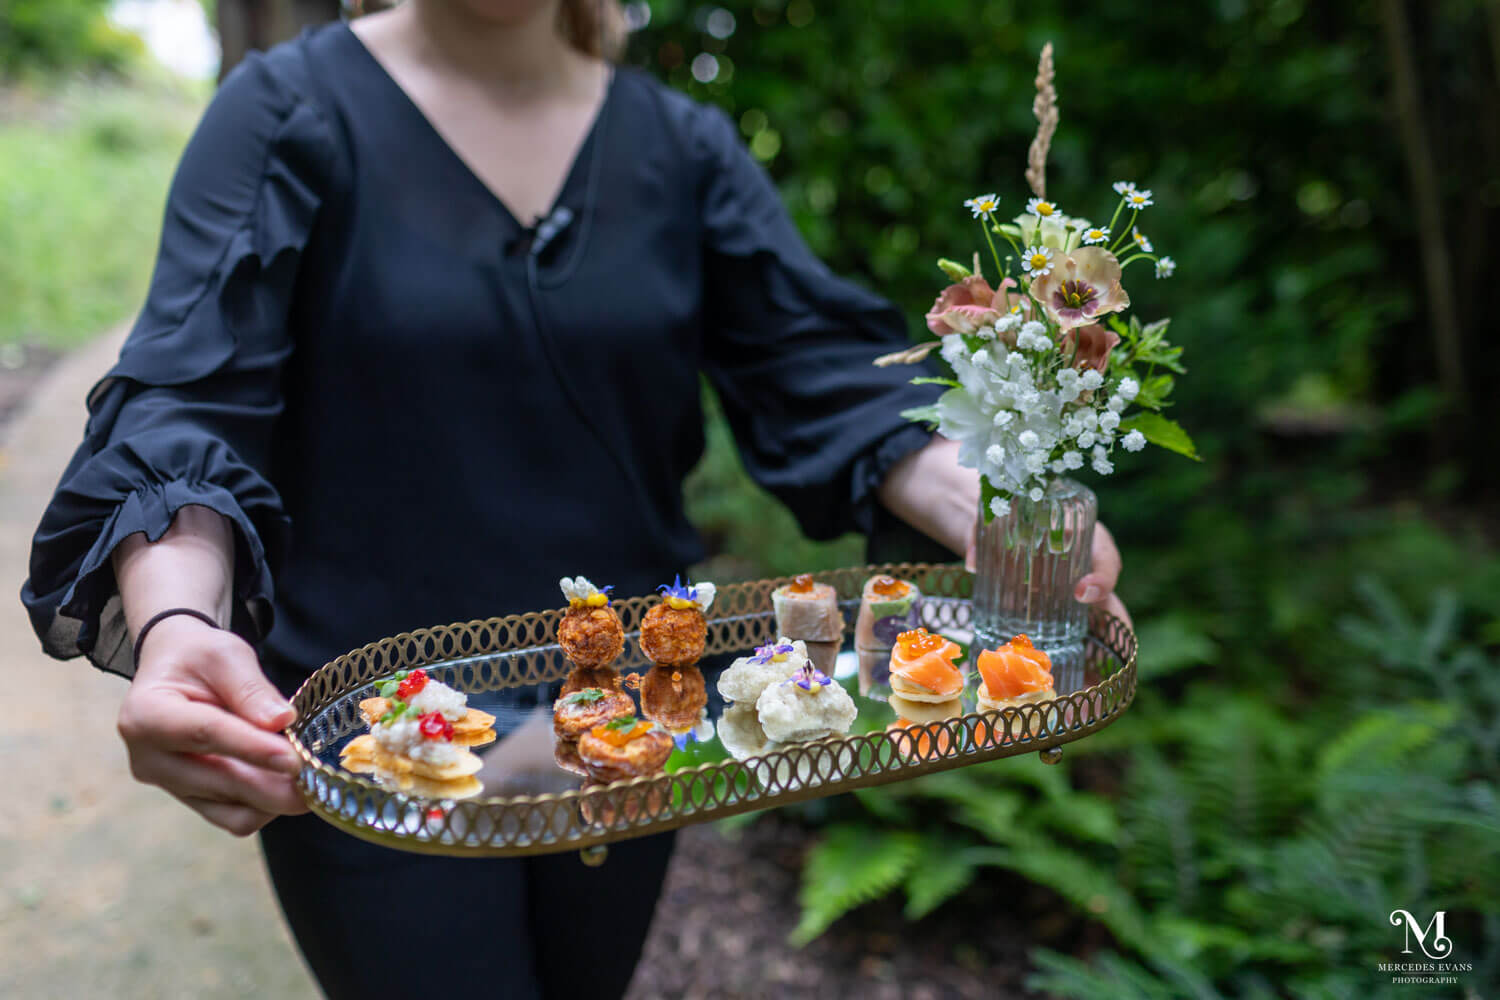 canapés carried on a reflective tray with a small vase of flowers